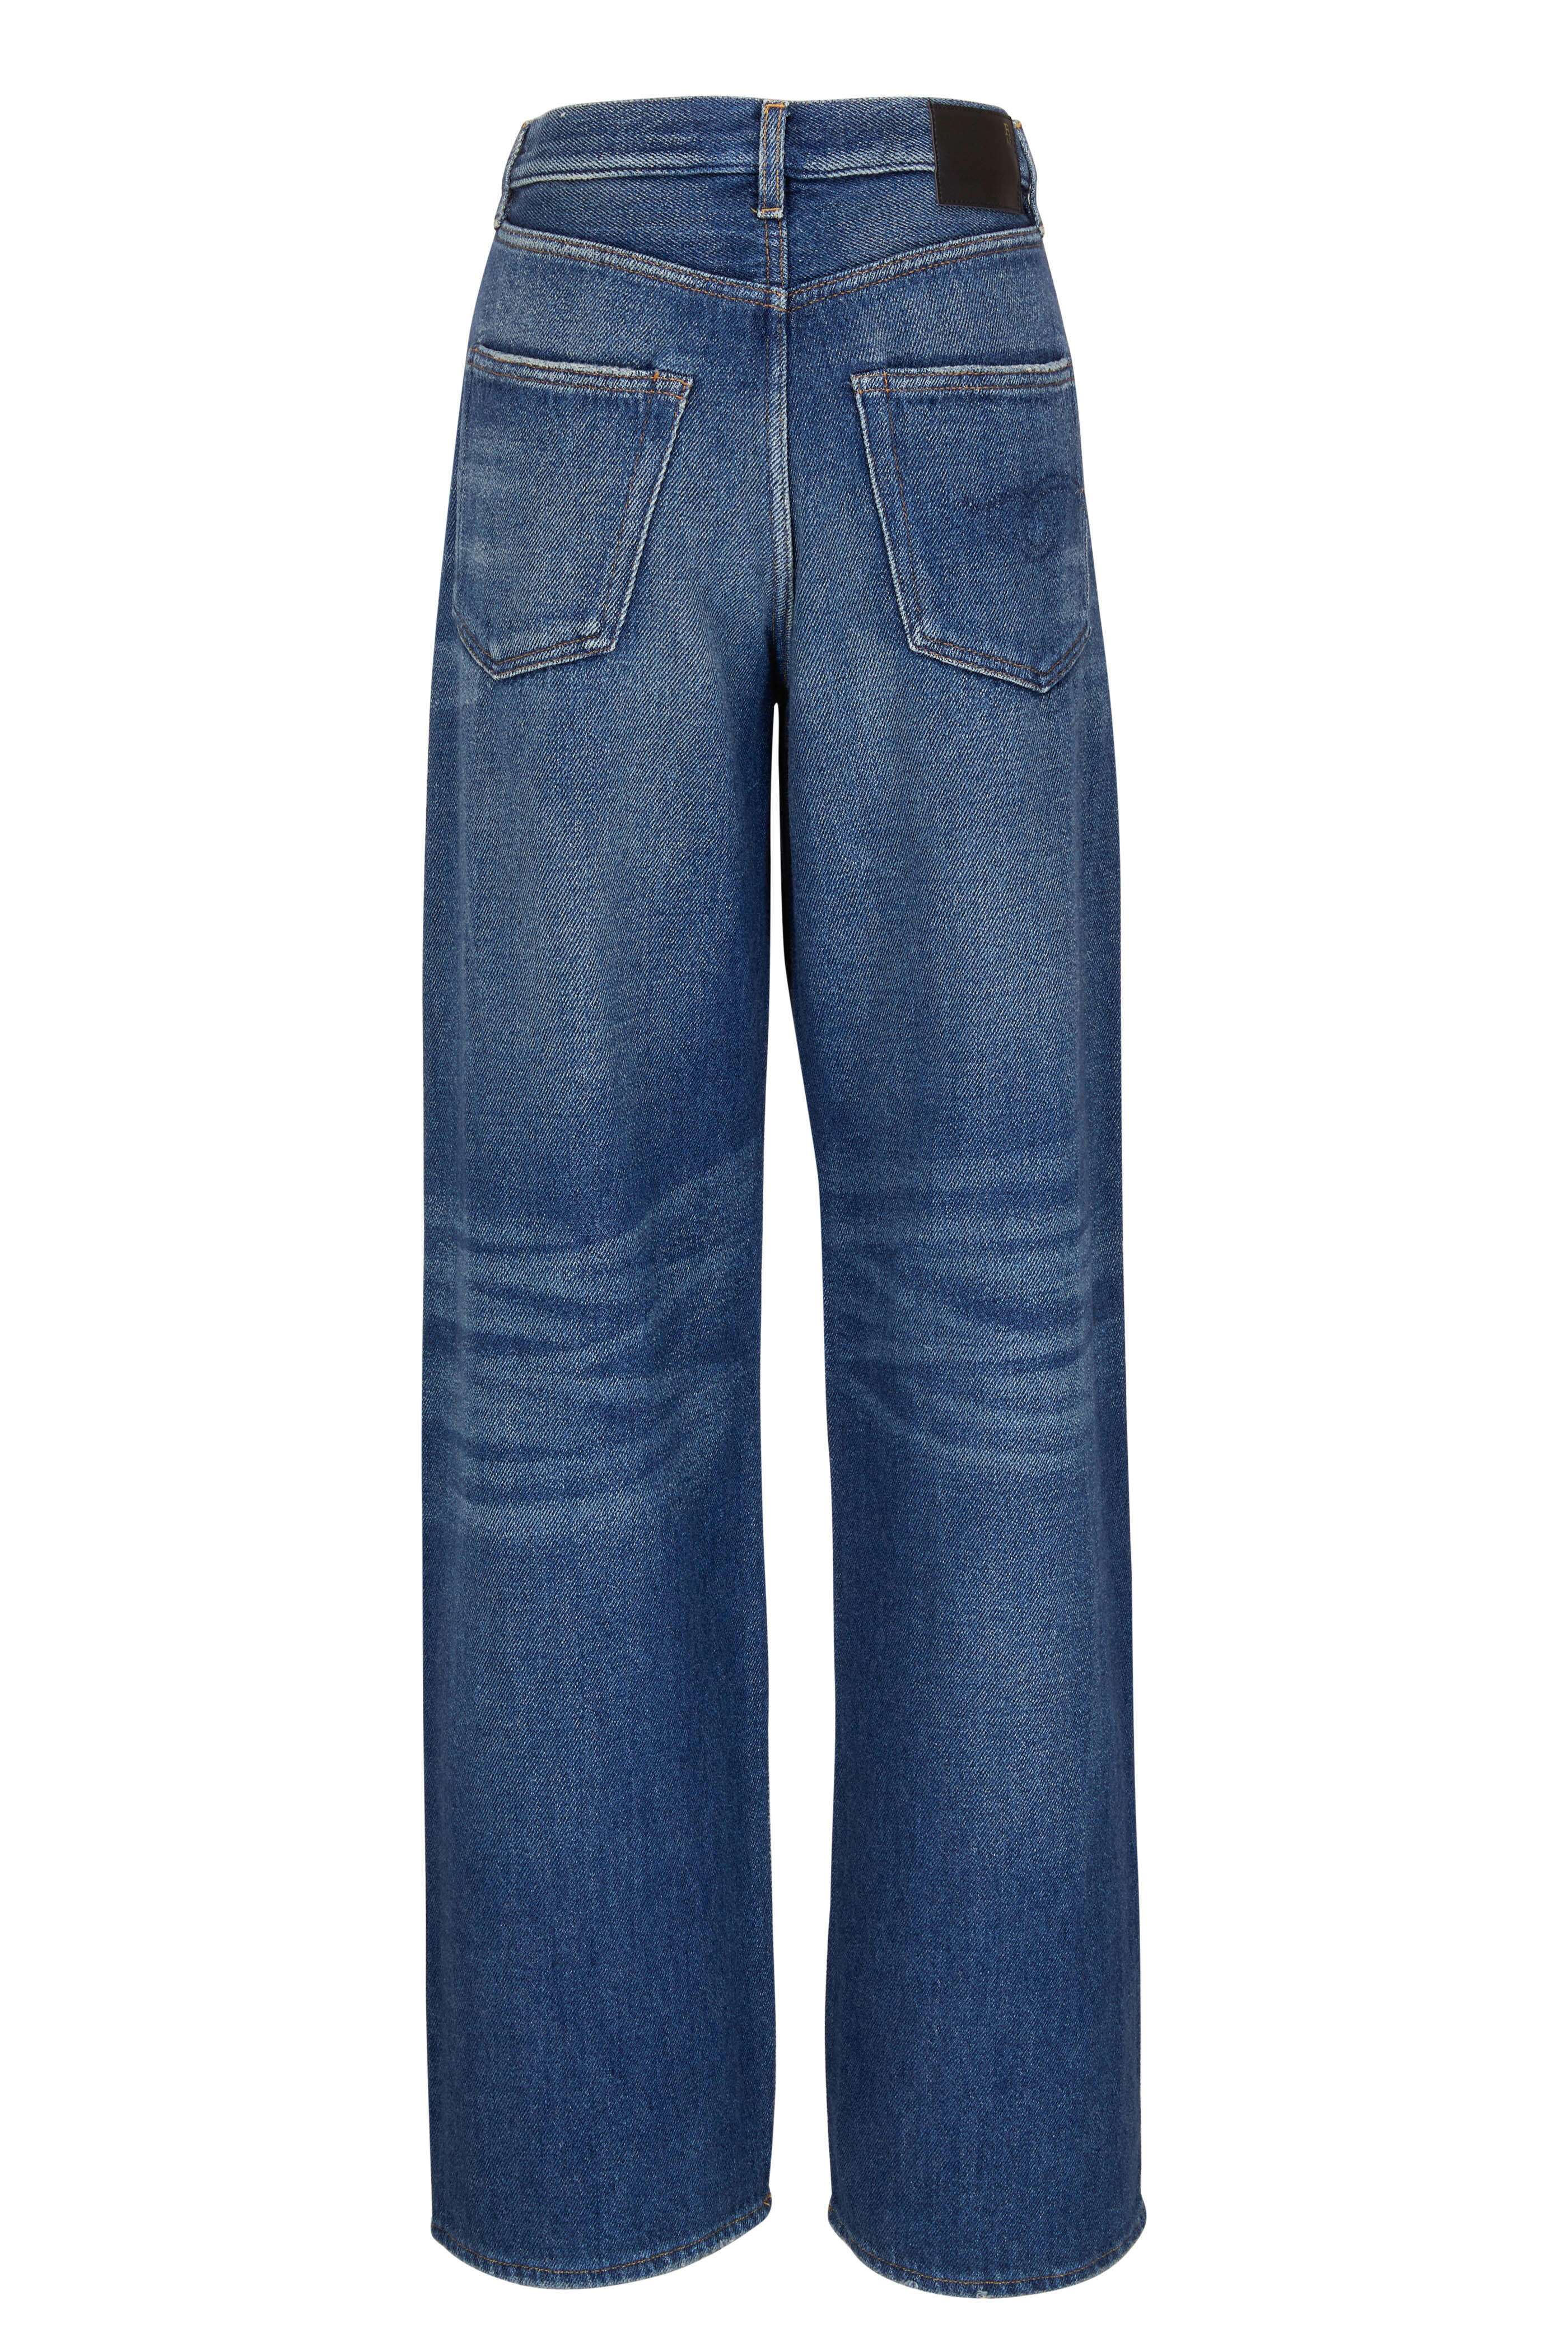 R13 Blue D'arcy Jeans